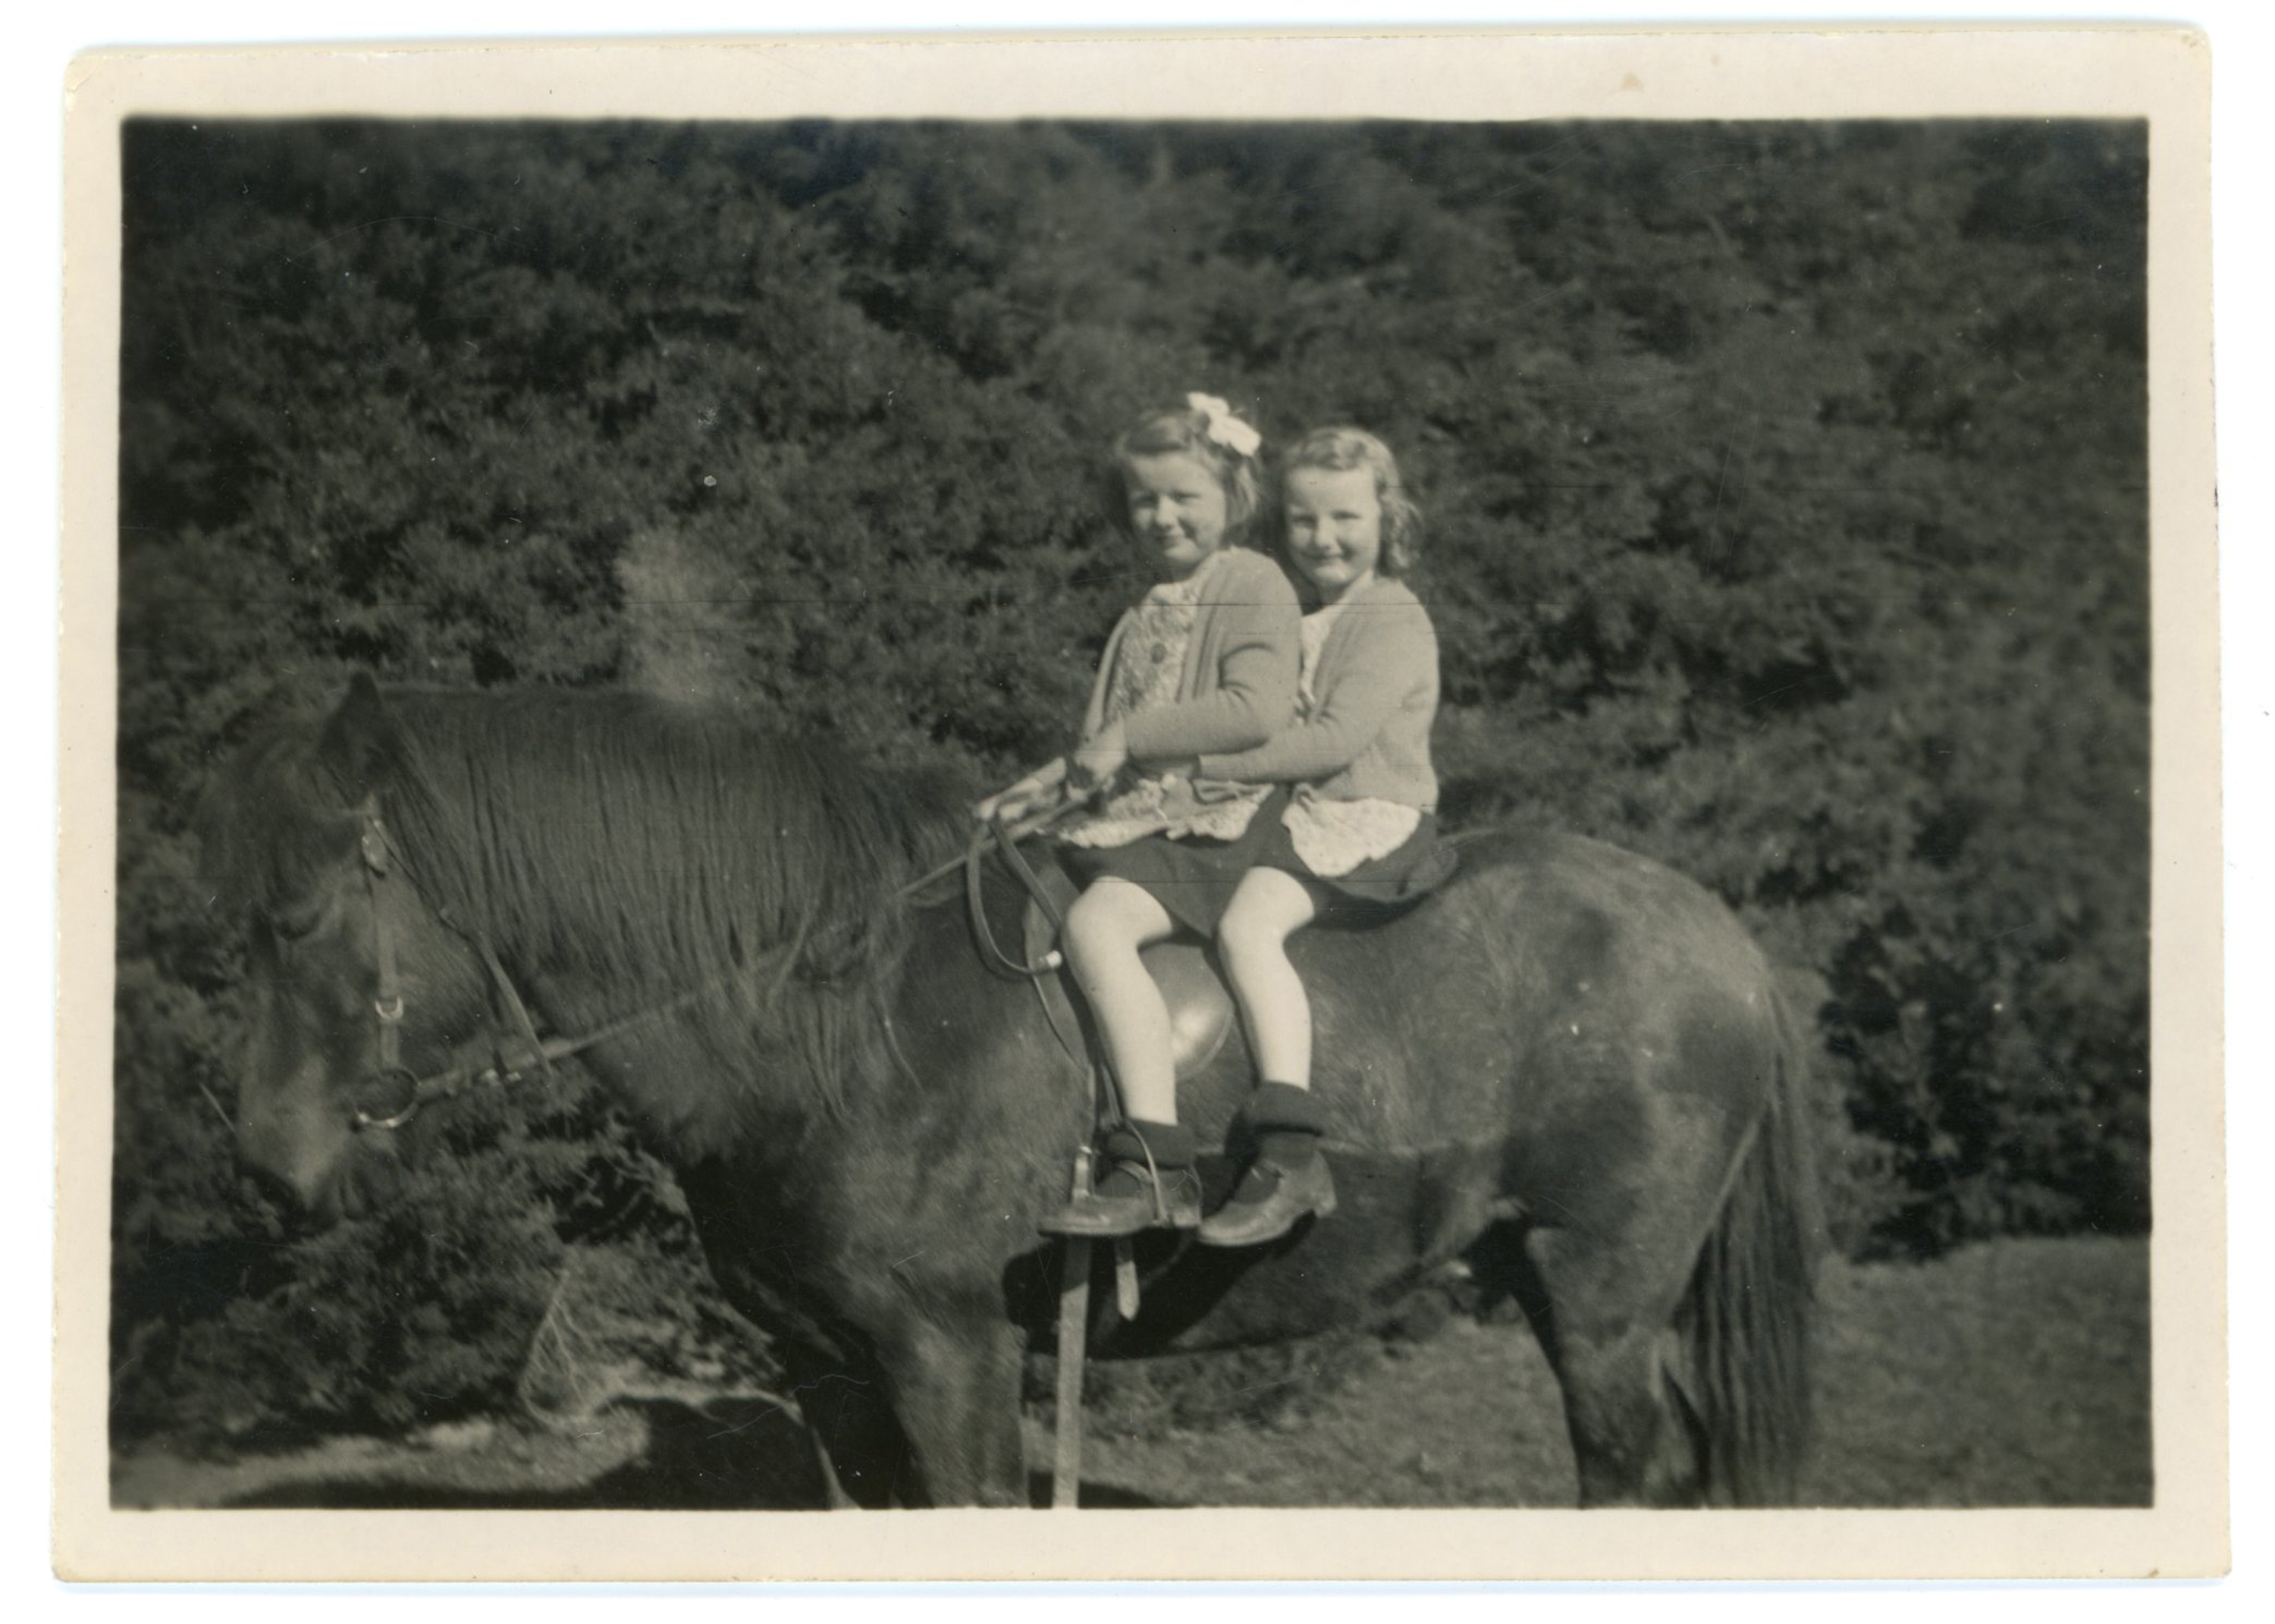 Dorothy Bruce (Left) and the Interviewee, Robina Bruce (Right), Aged 6 and 5 Respectively